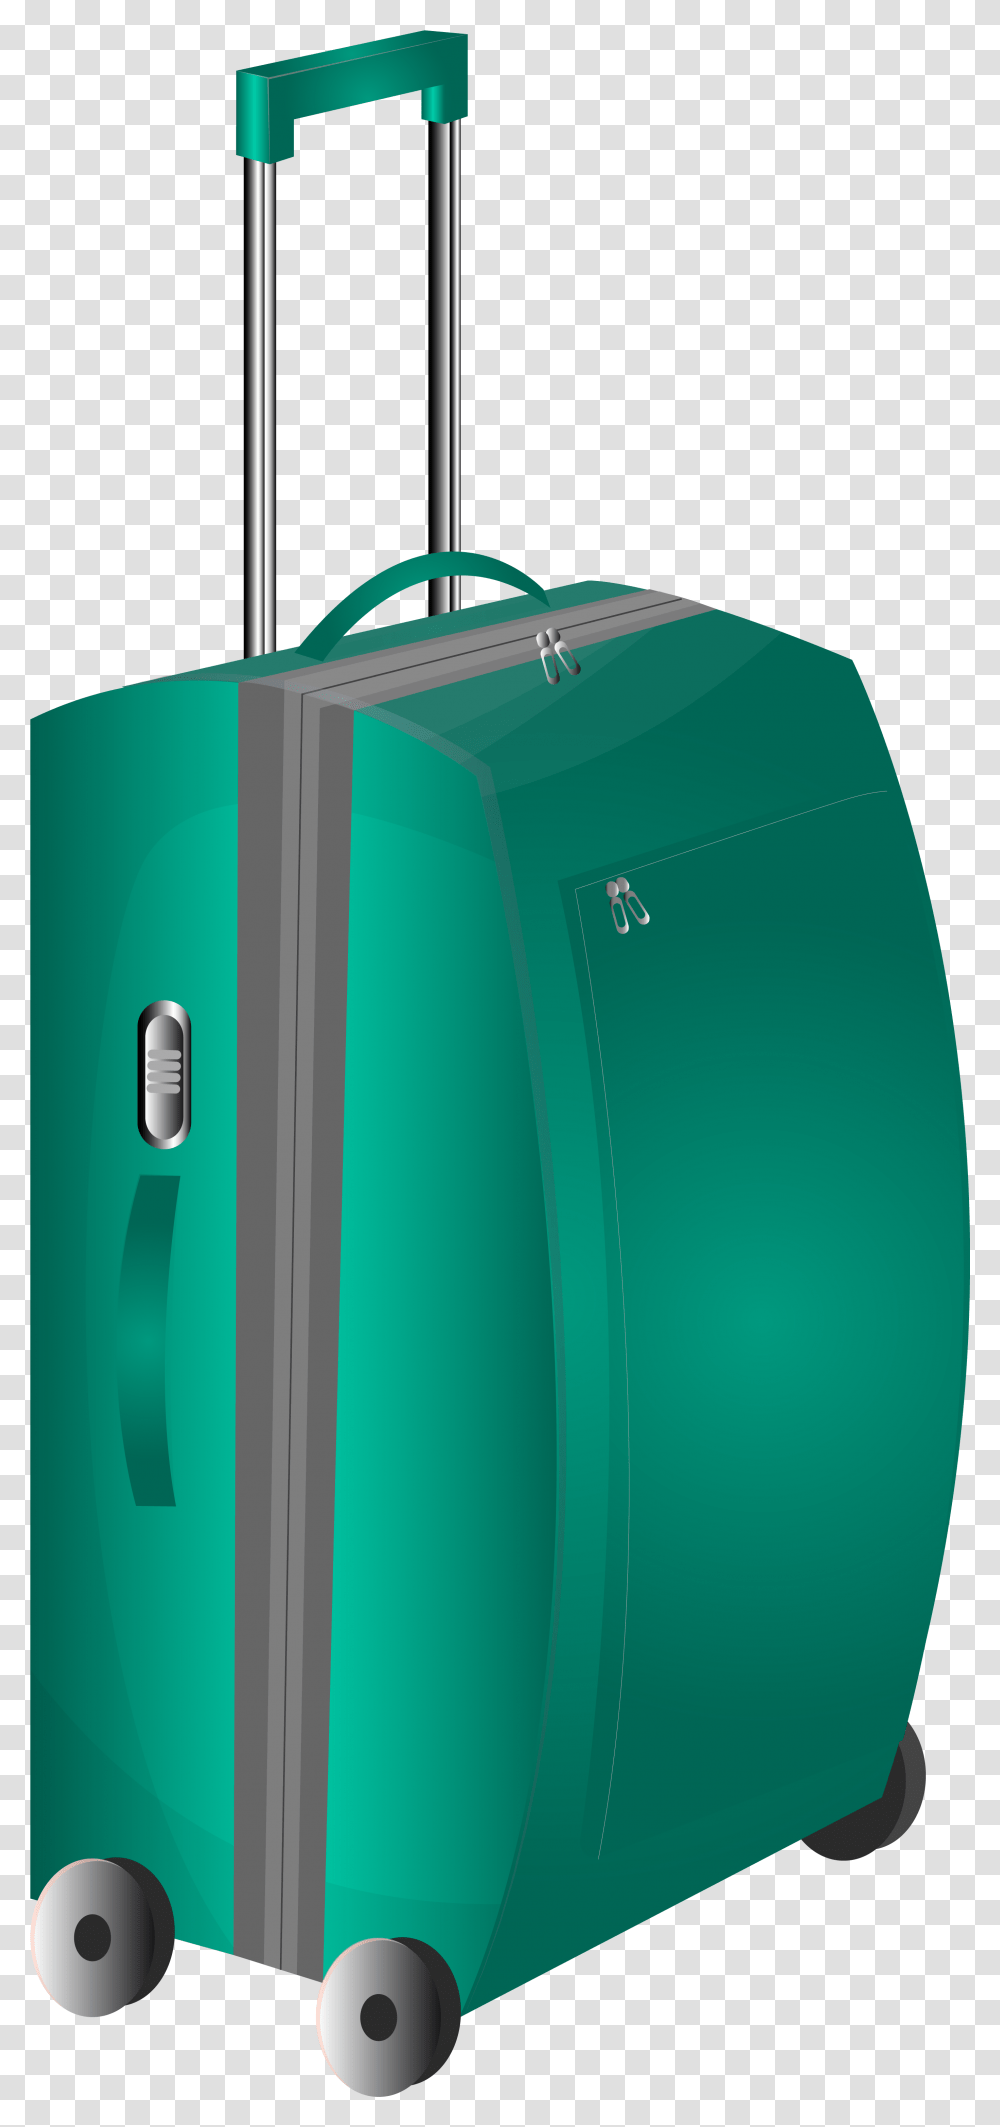 Travel Suitcase Vector Images Trolley Bag File, Luggage, Briefcase Transparent Png